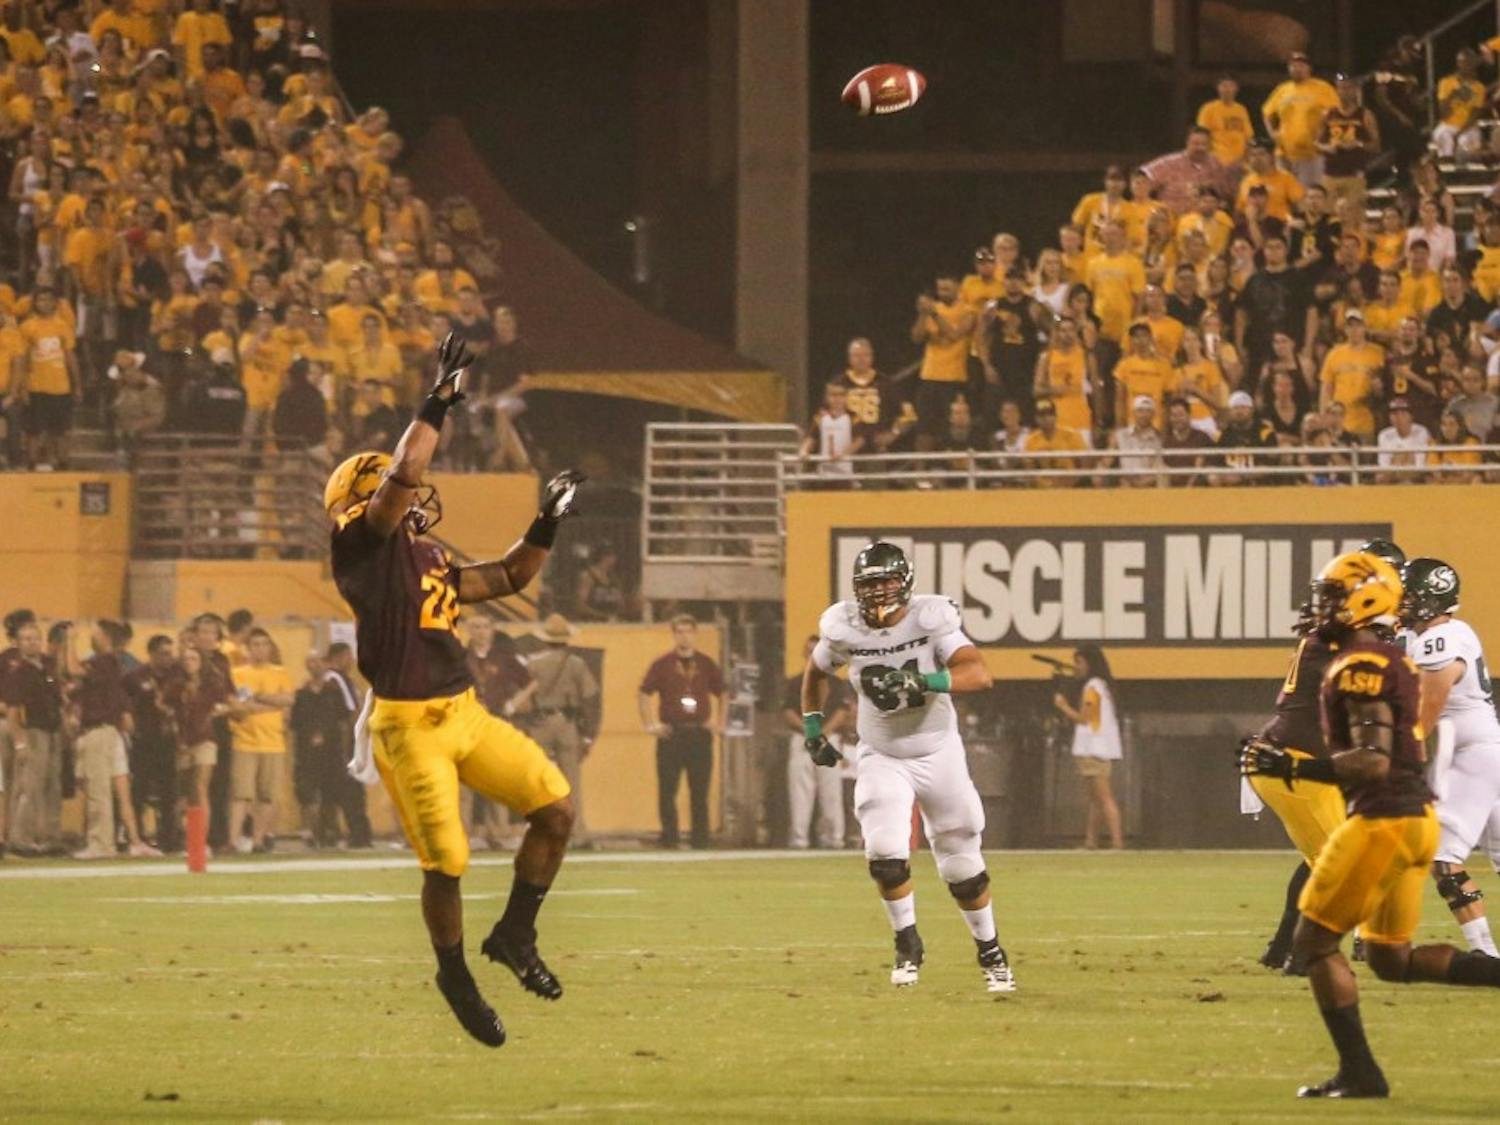 Slideshow: Photos from ASU's Opening Football Game